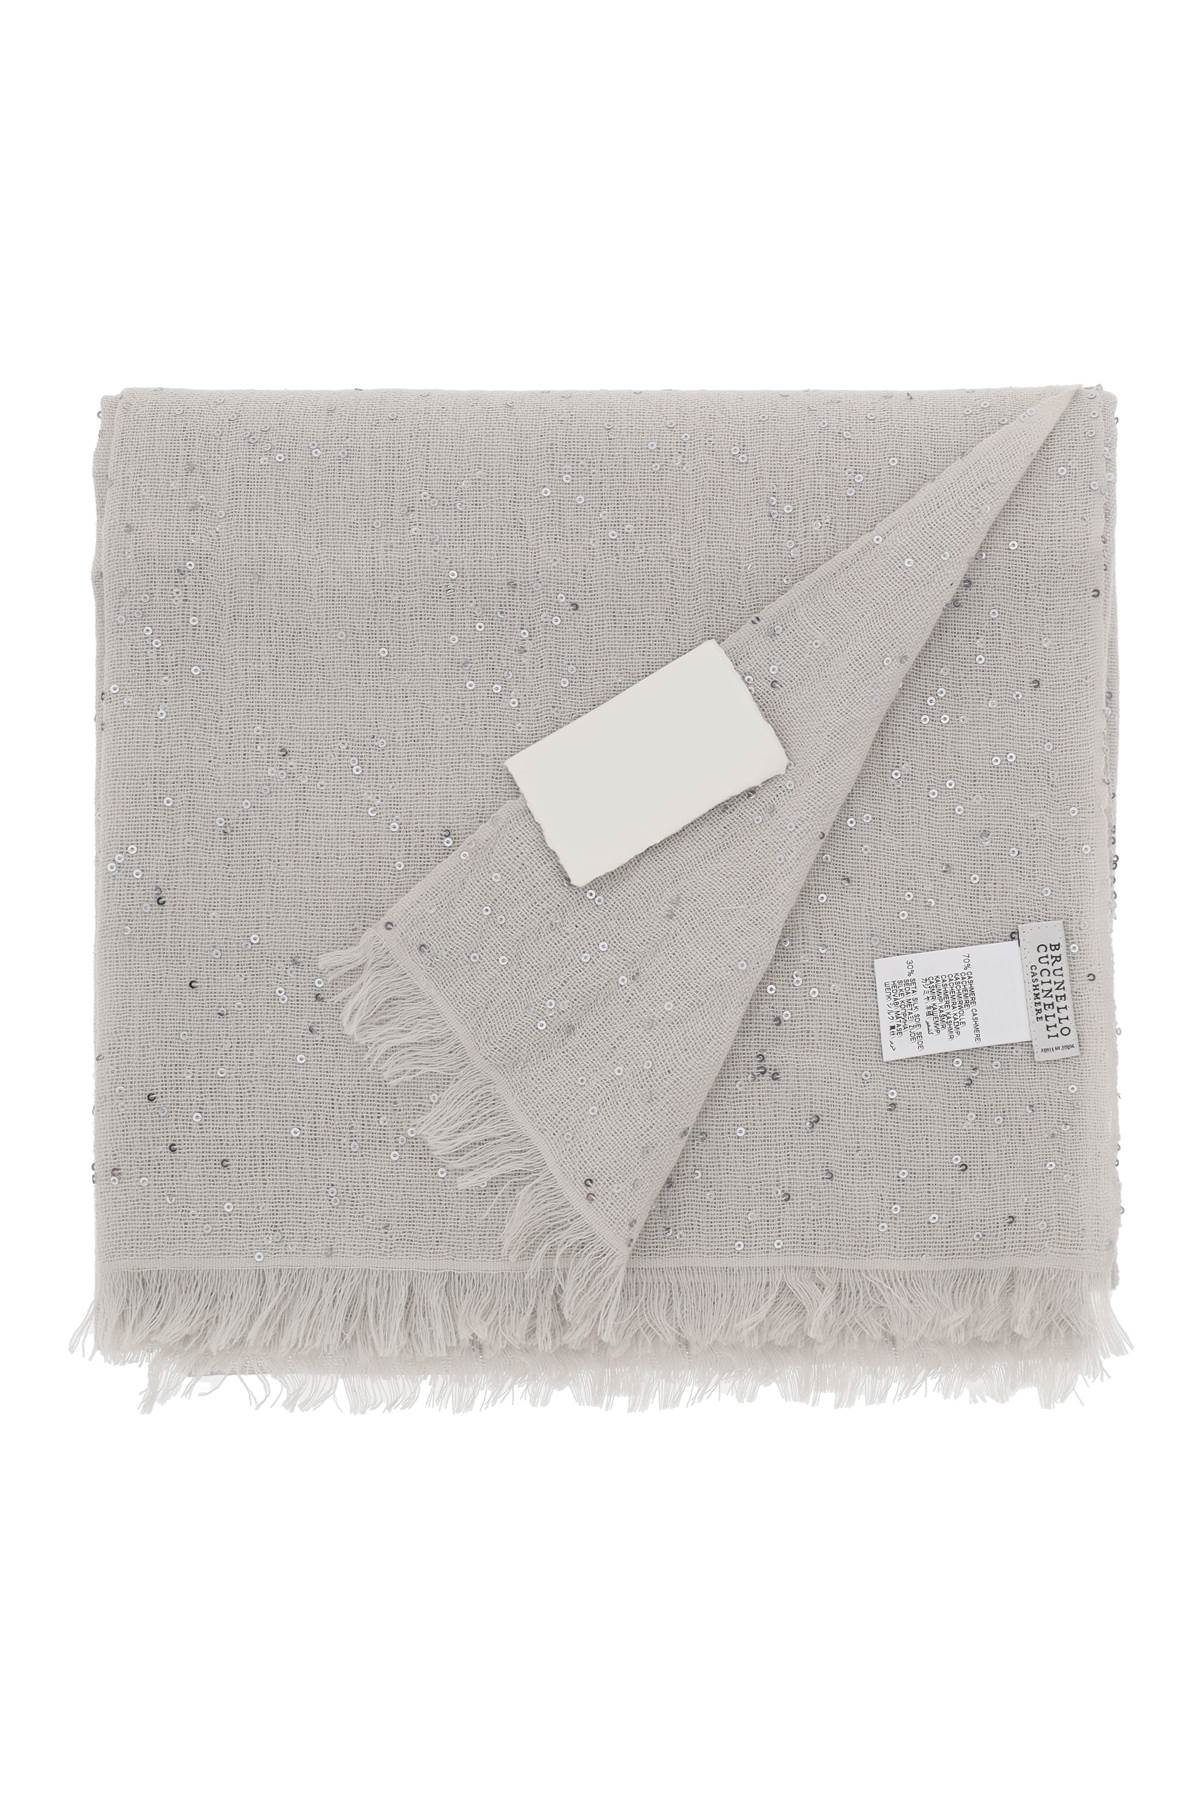 BRUNELLO CUCINELLI Luxurious Cashmere and Silk Scarf with Diamond Sequin Pattern and Fringed Edges